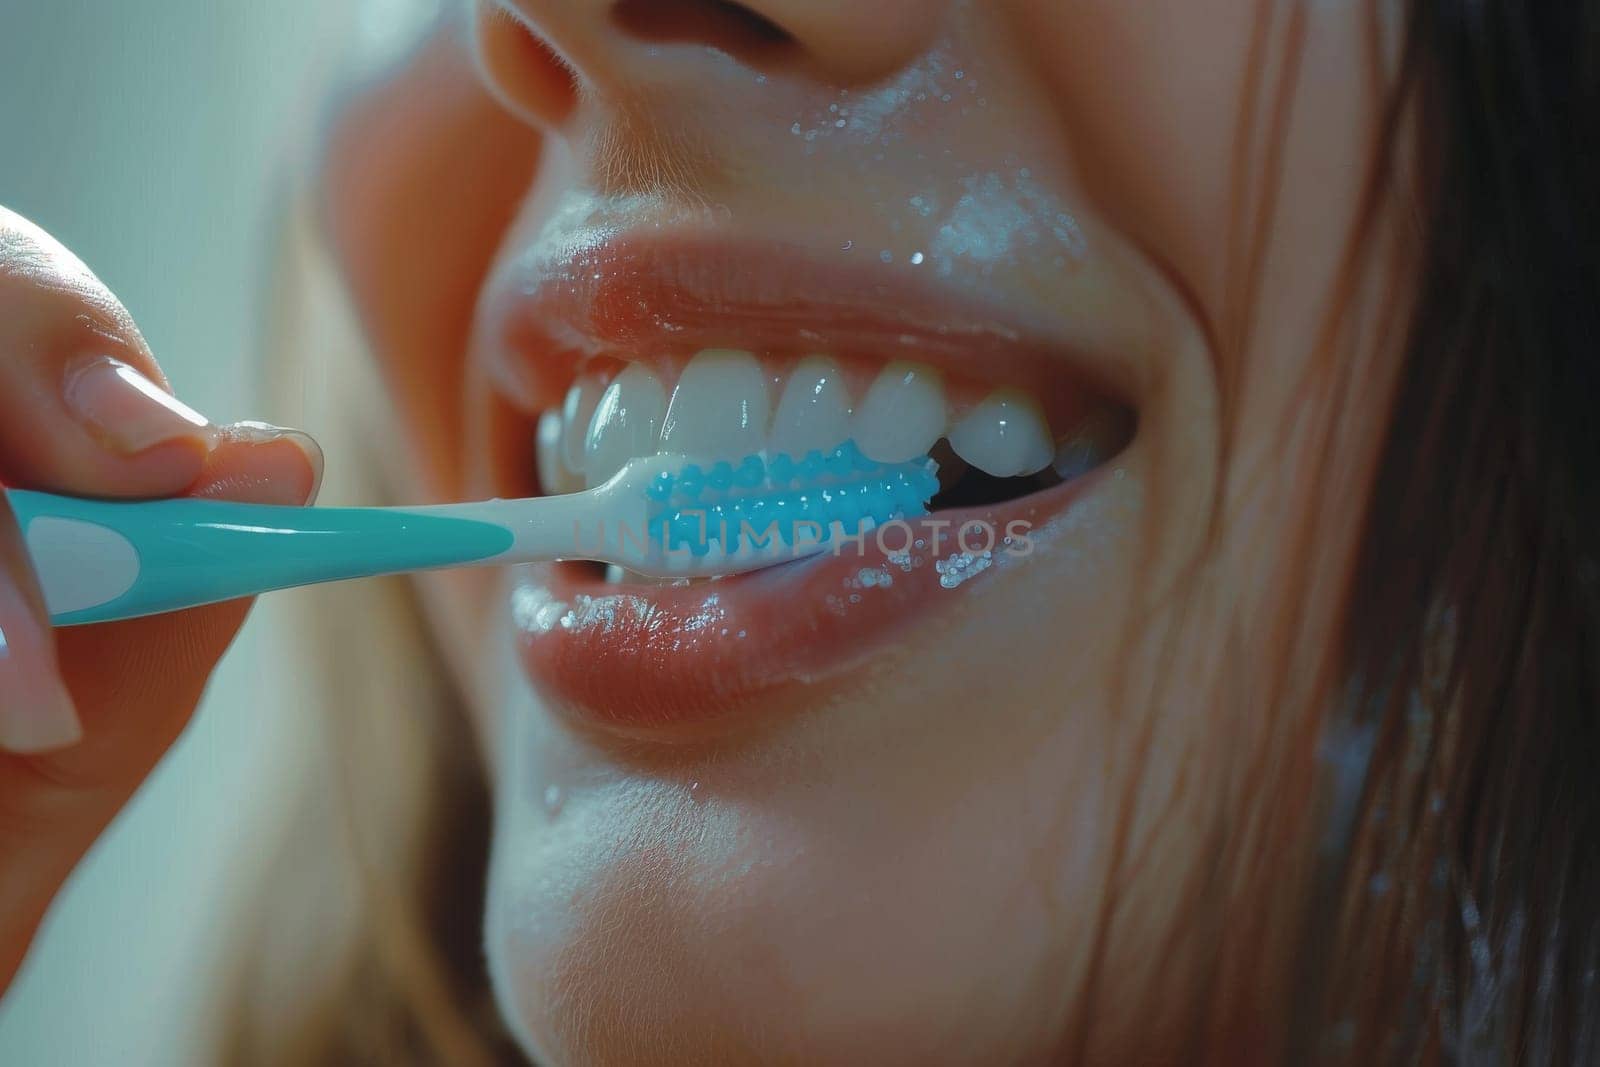 A woman is brushing her teeth with a blue toothbrush by itchaznong